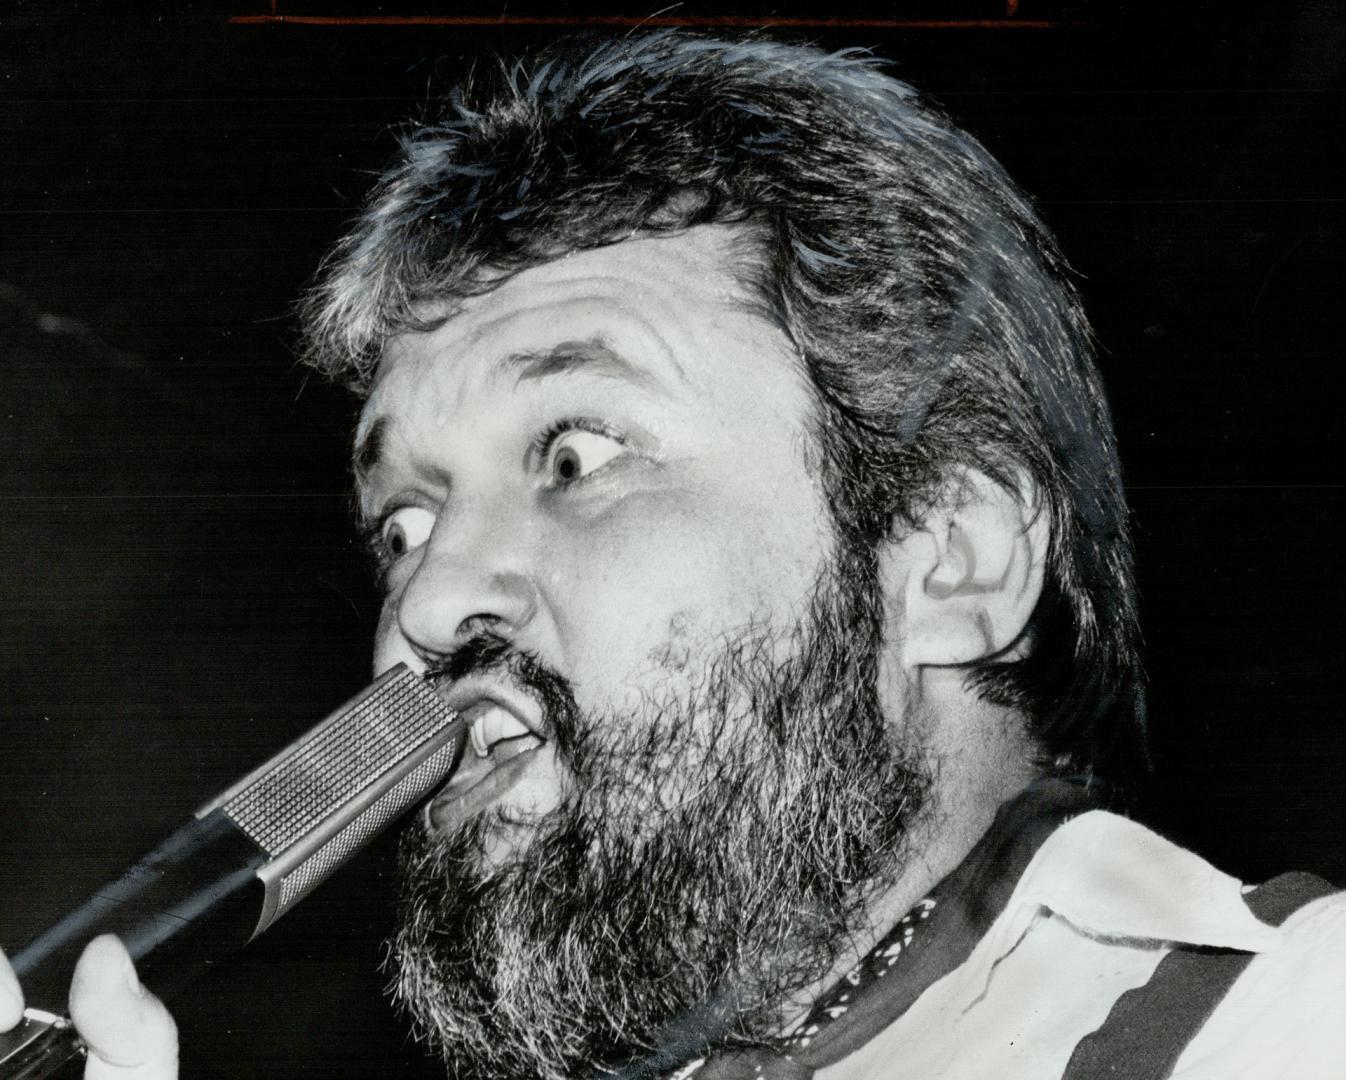 Rompin' Ronnie Hawkins: A brand-new two-year recording contract